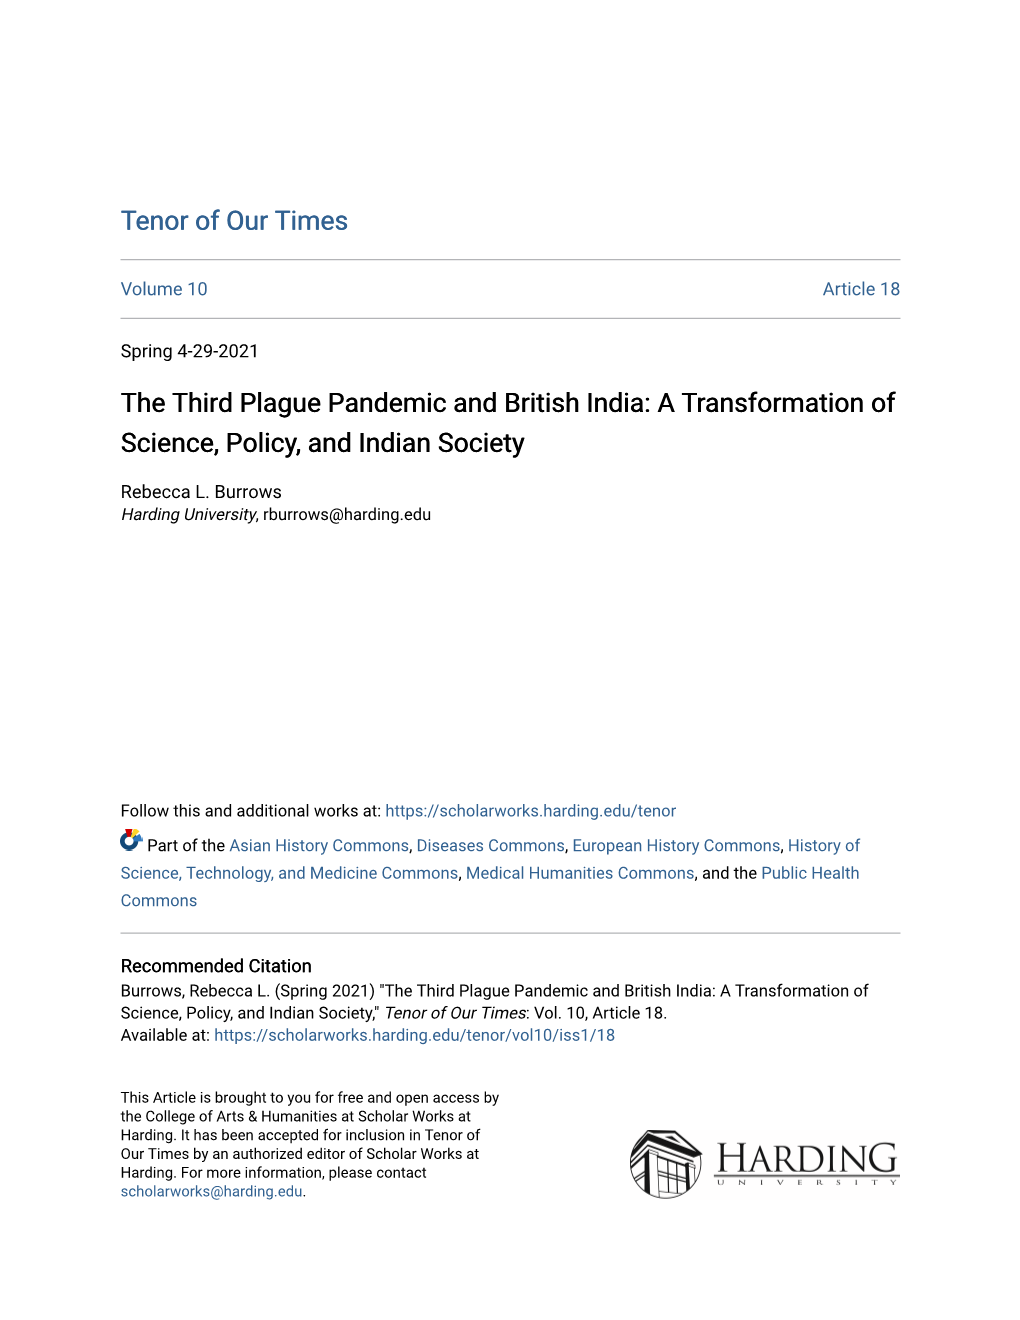 The Third Plague Pandemic and British India: a Transformation of Science, Policy, and Indian Society